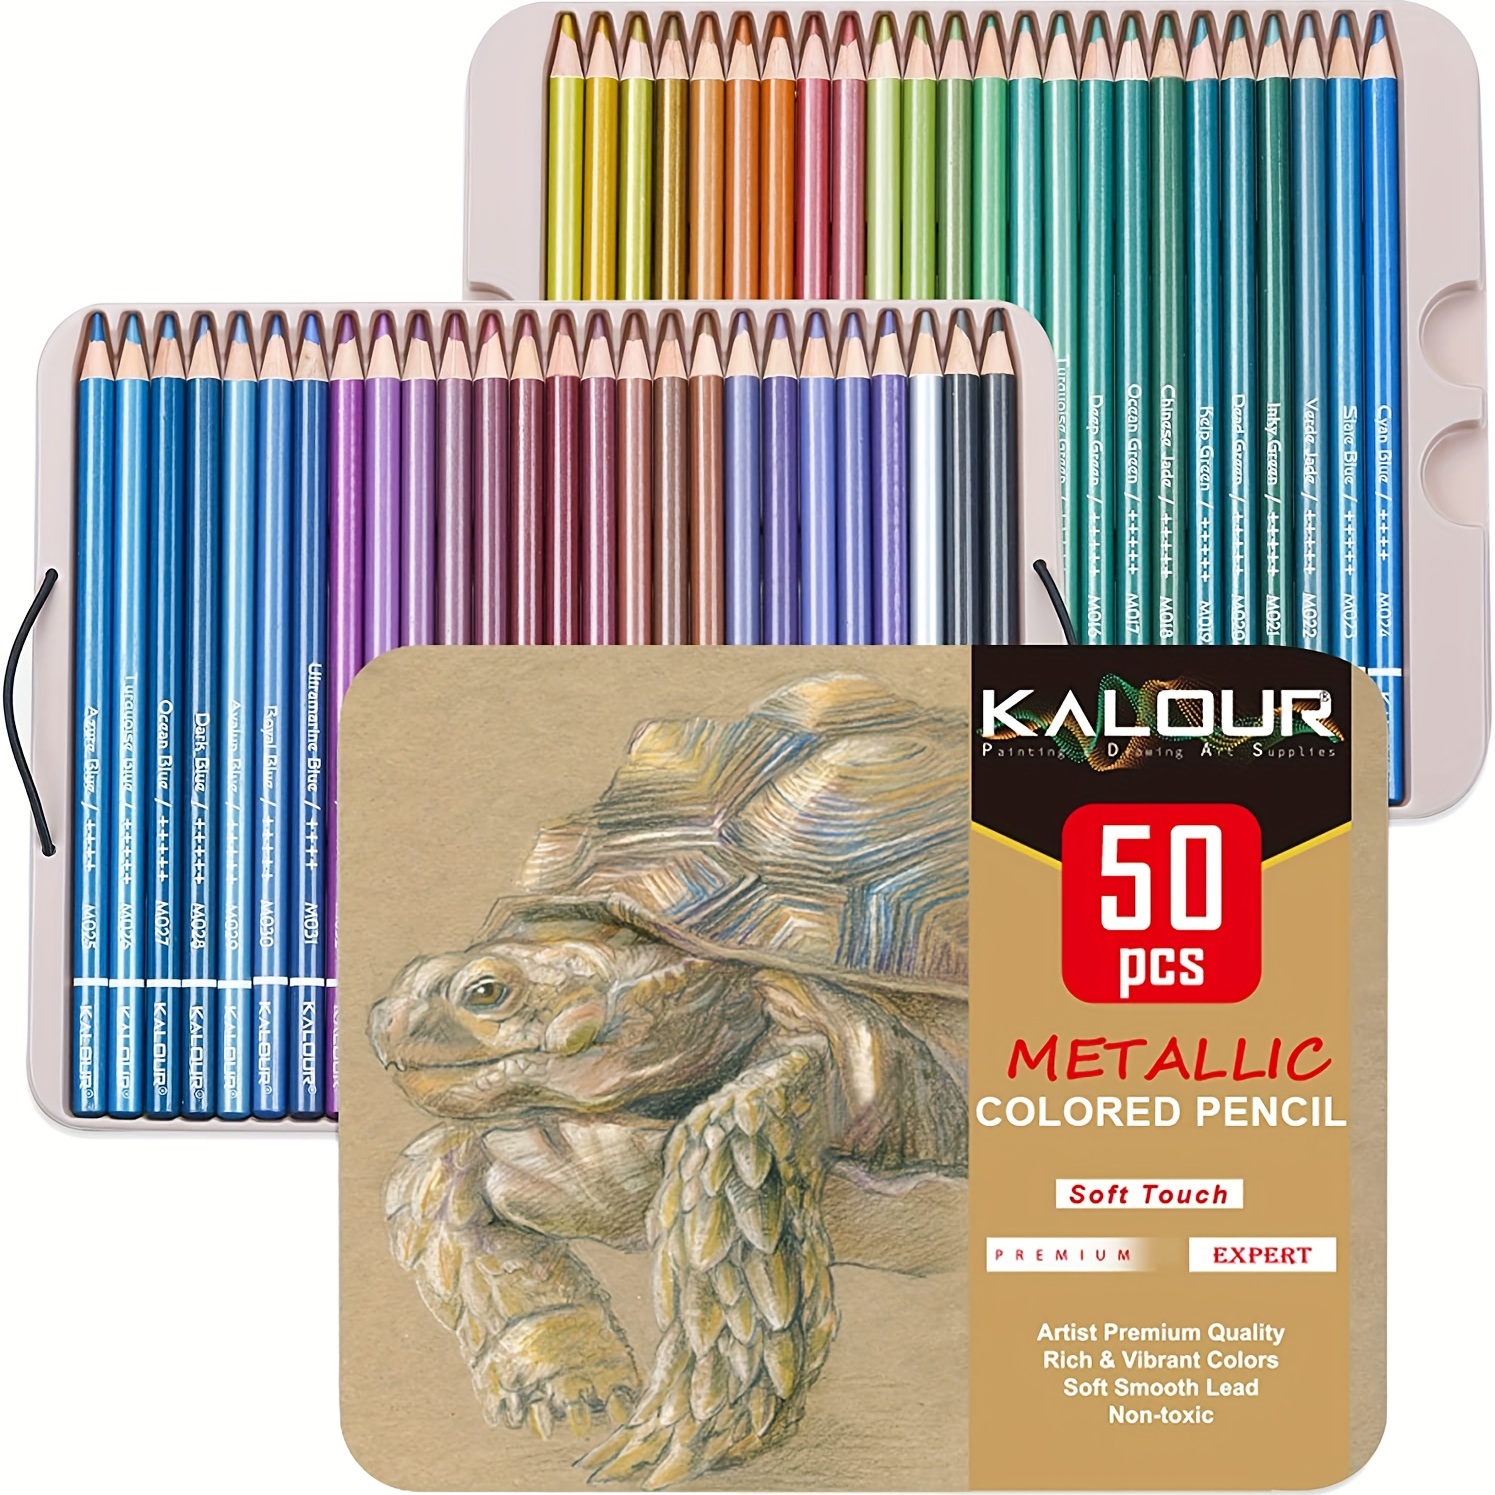 KALOUR Watercolor Pencils - Professional Set of 72 - Beautiful Blending  Effects with Wet or Dry - Ideal for Coloring Book - Water Soluble Pencils  for